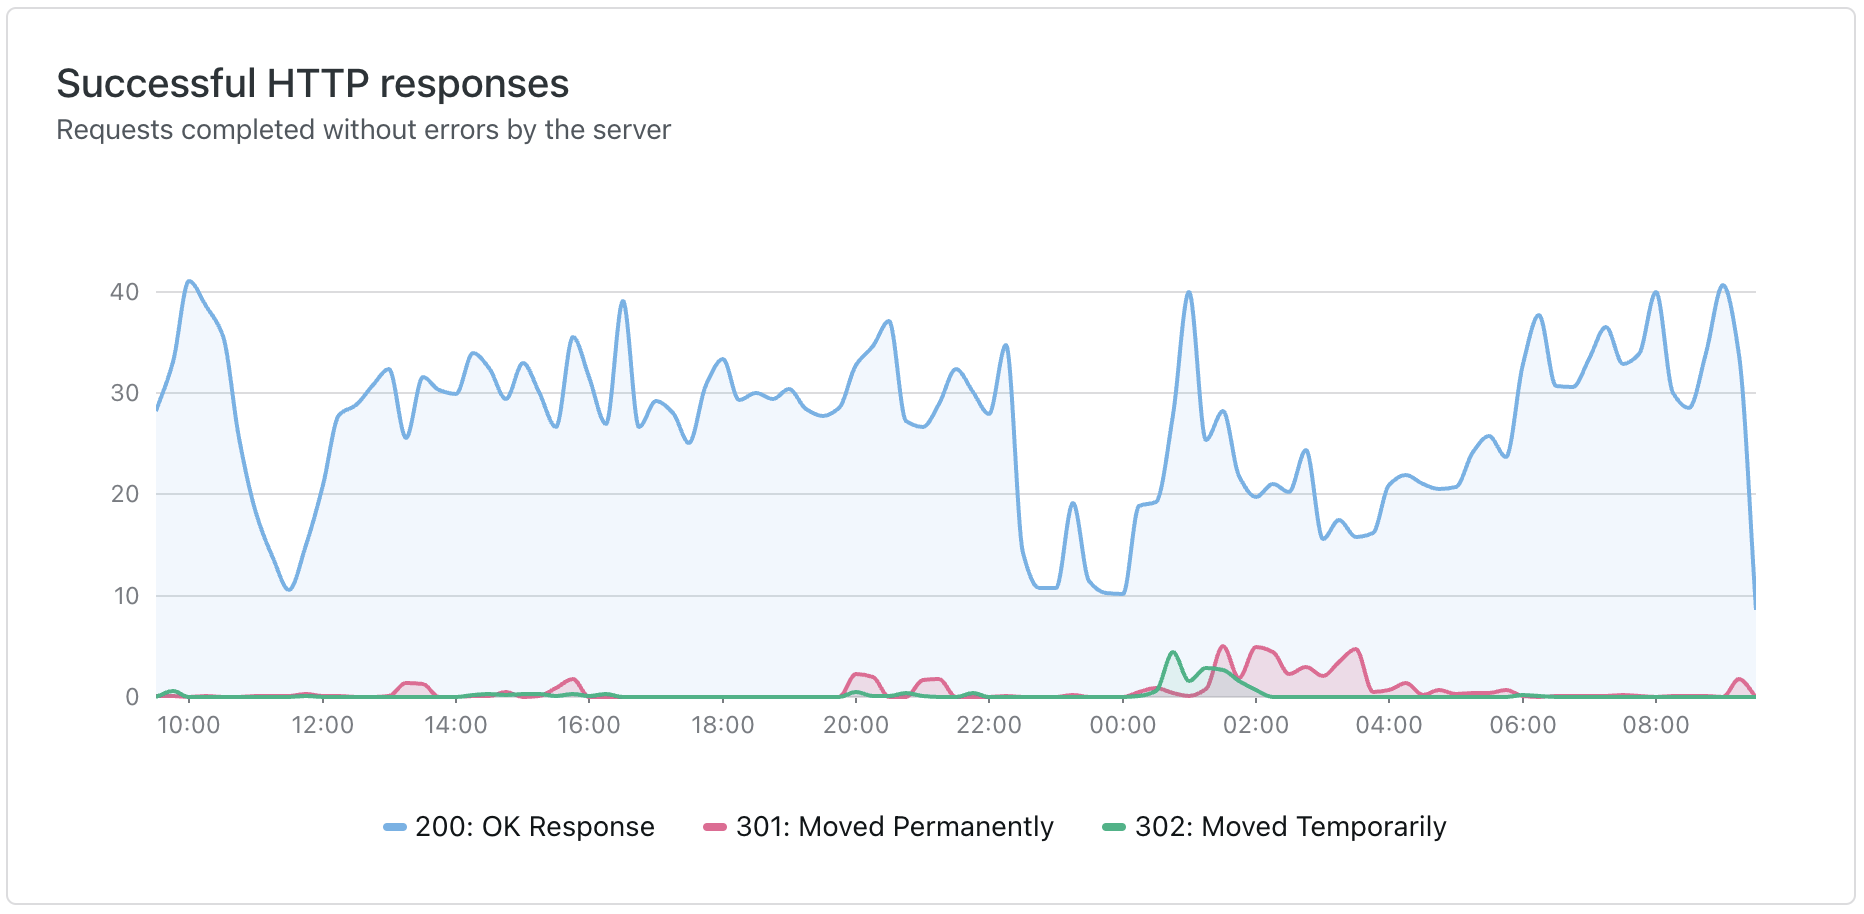 Image showing line graph of successful HTTP responses by response code.